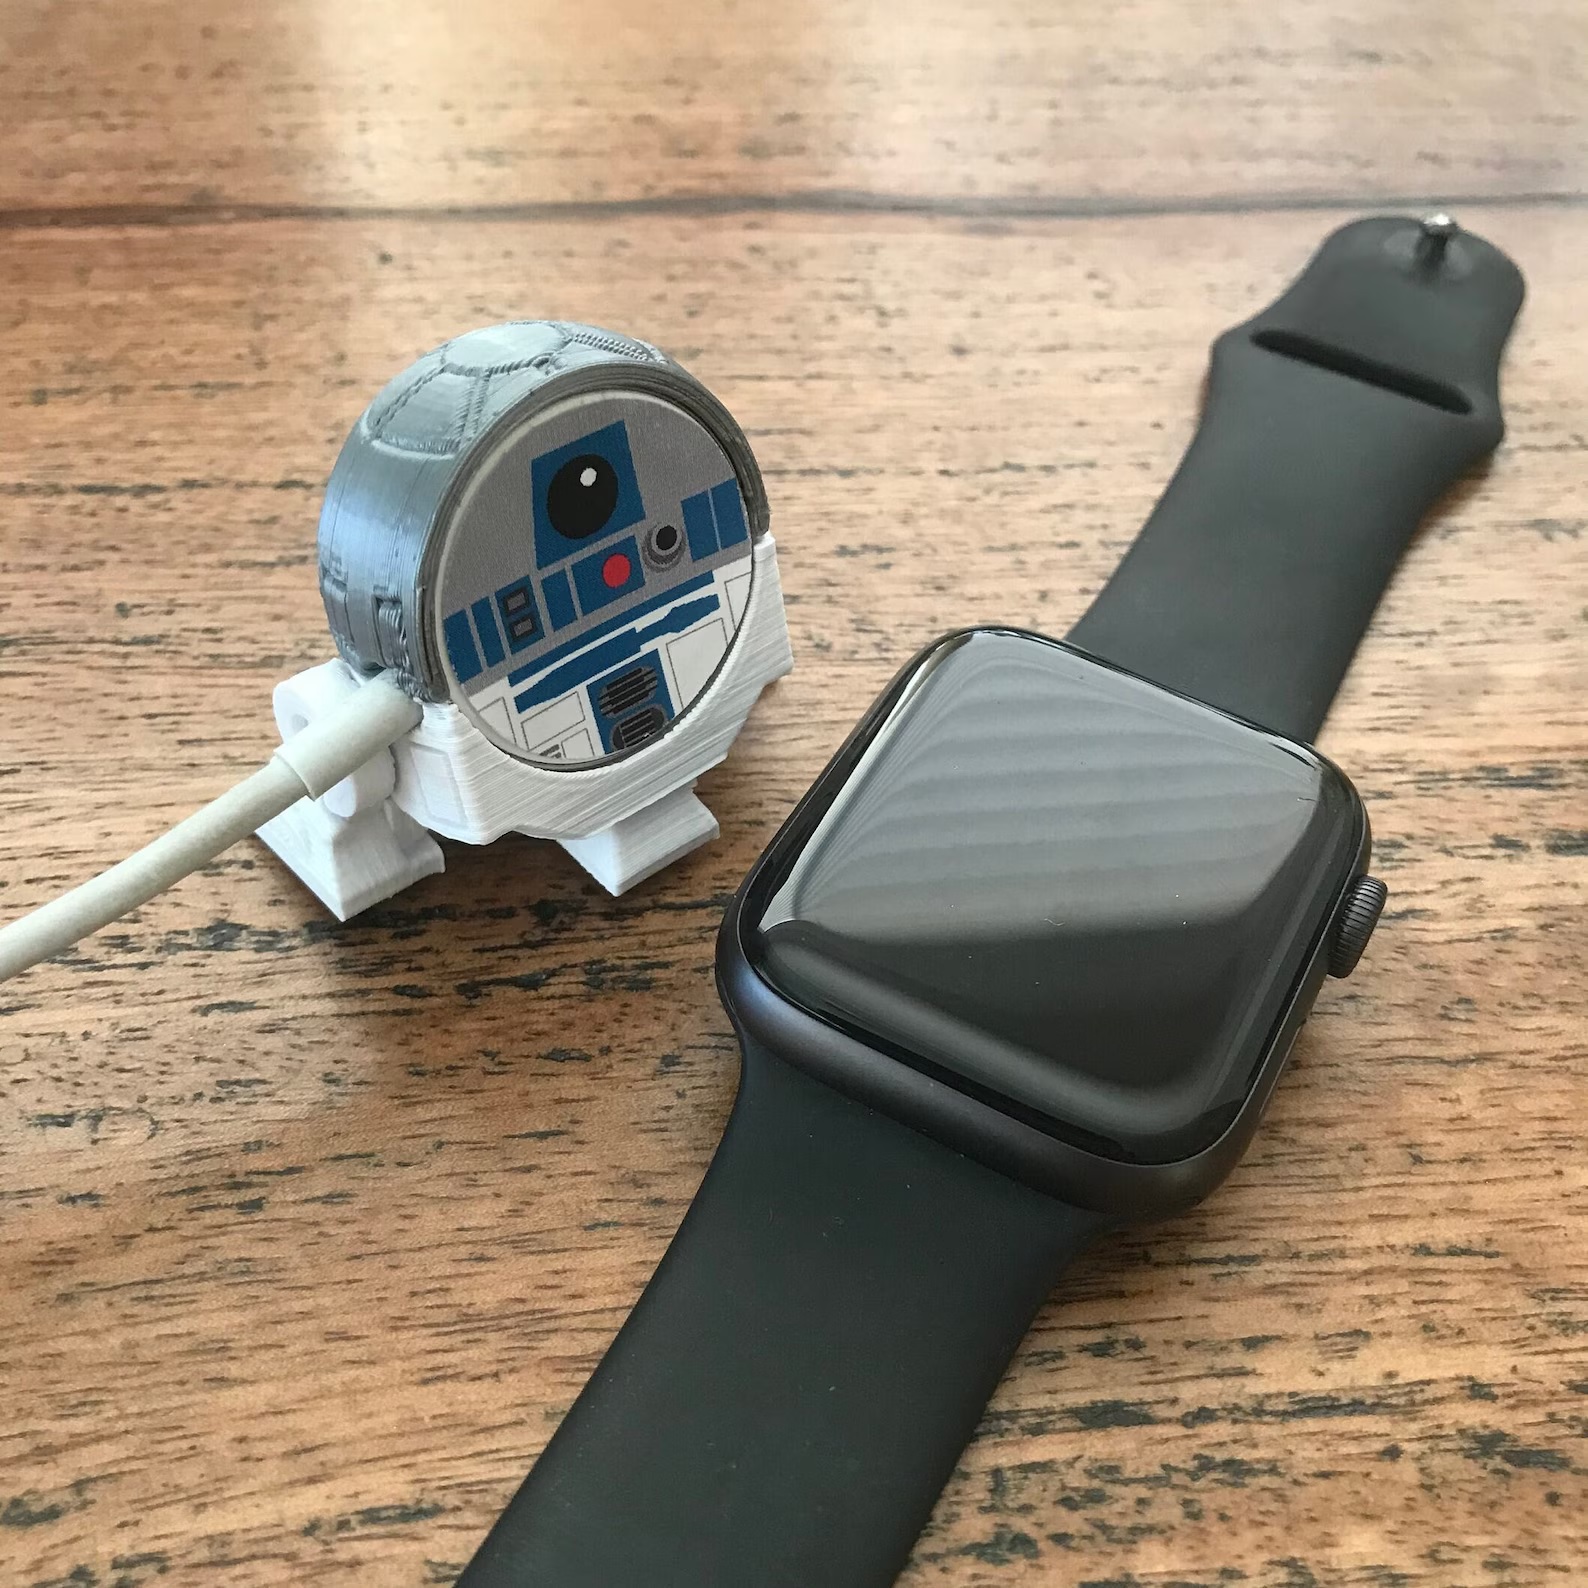 A R2D2-shaped Apple Watch charger cover, next to an Apple Watch for scale